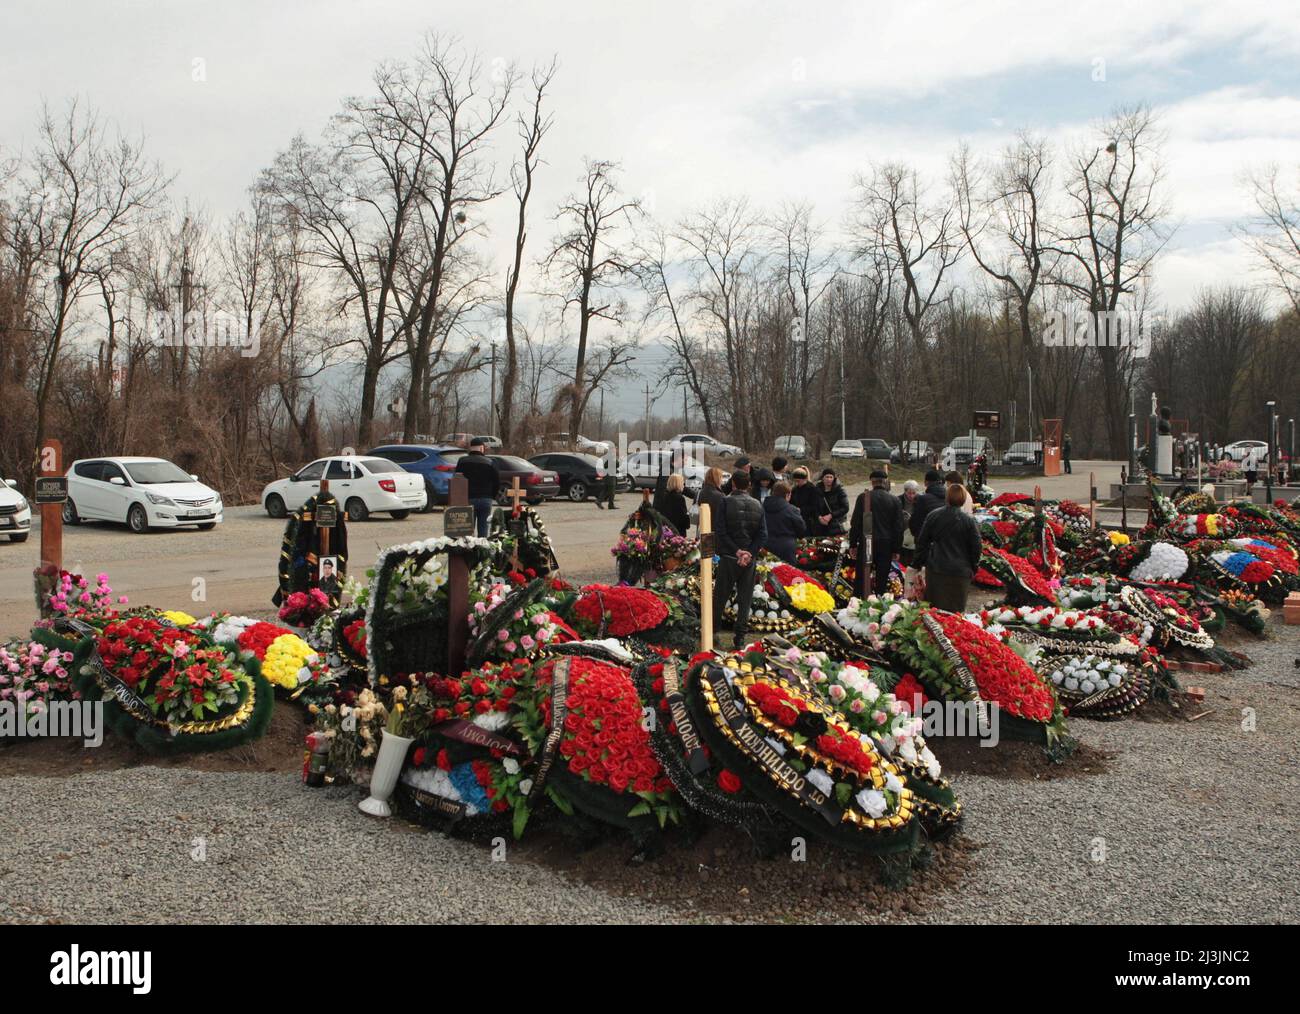 Graves of Russian service members who were killed during Ukraine-Russia conflict are seen at a cemetery in Vladikavkaz, Russia April 8, 2022. REUTERS/REUTERS PHOTOGRAPHER Stock Photo